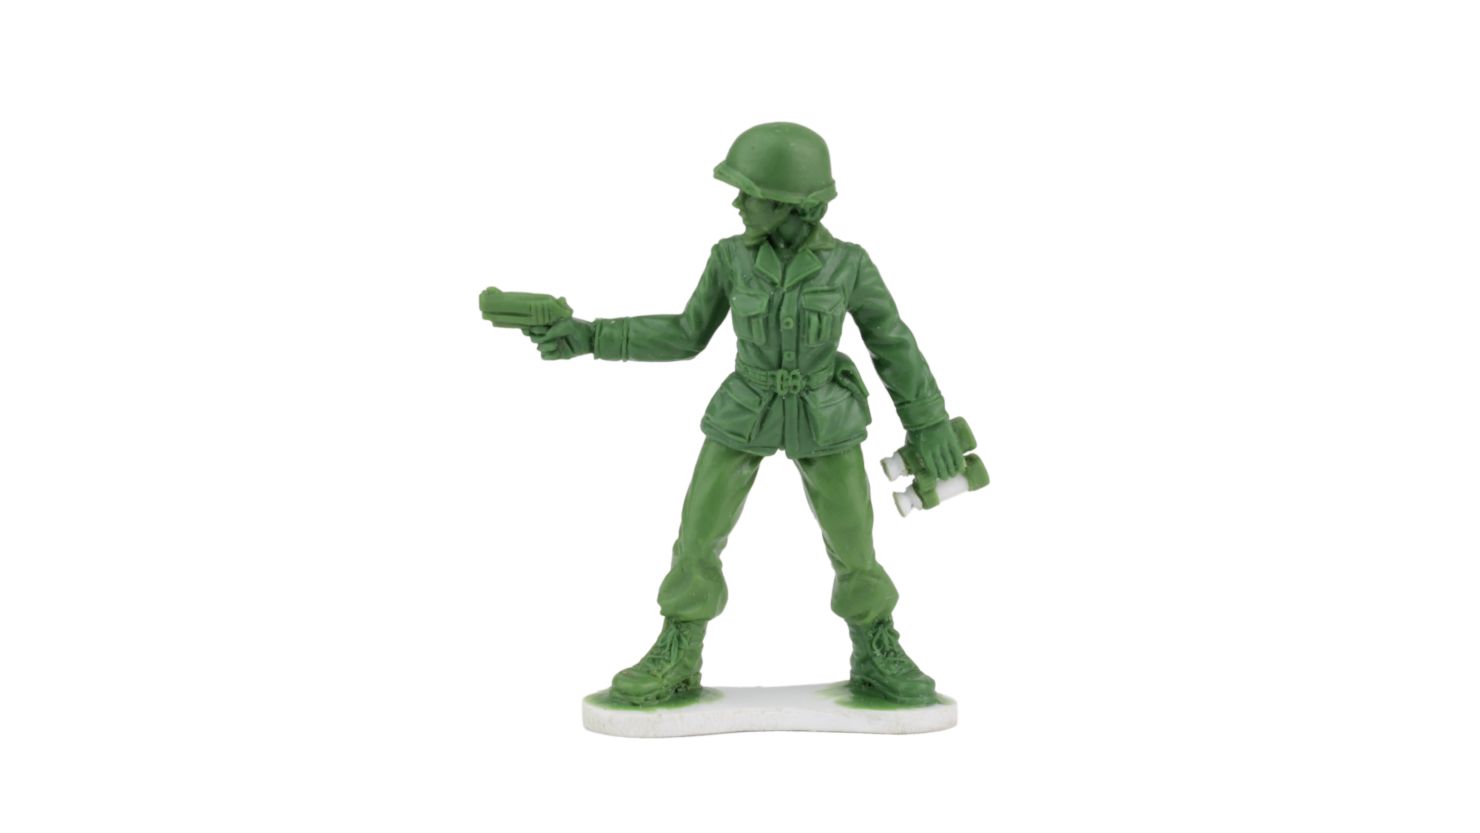 BMC Toys plans to start selling the female soldiers next year. This is a prototype of one of the figures.